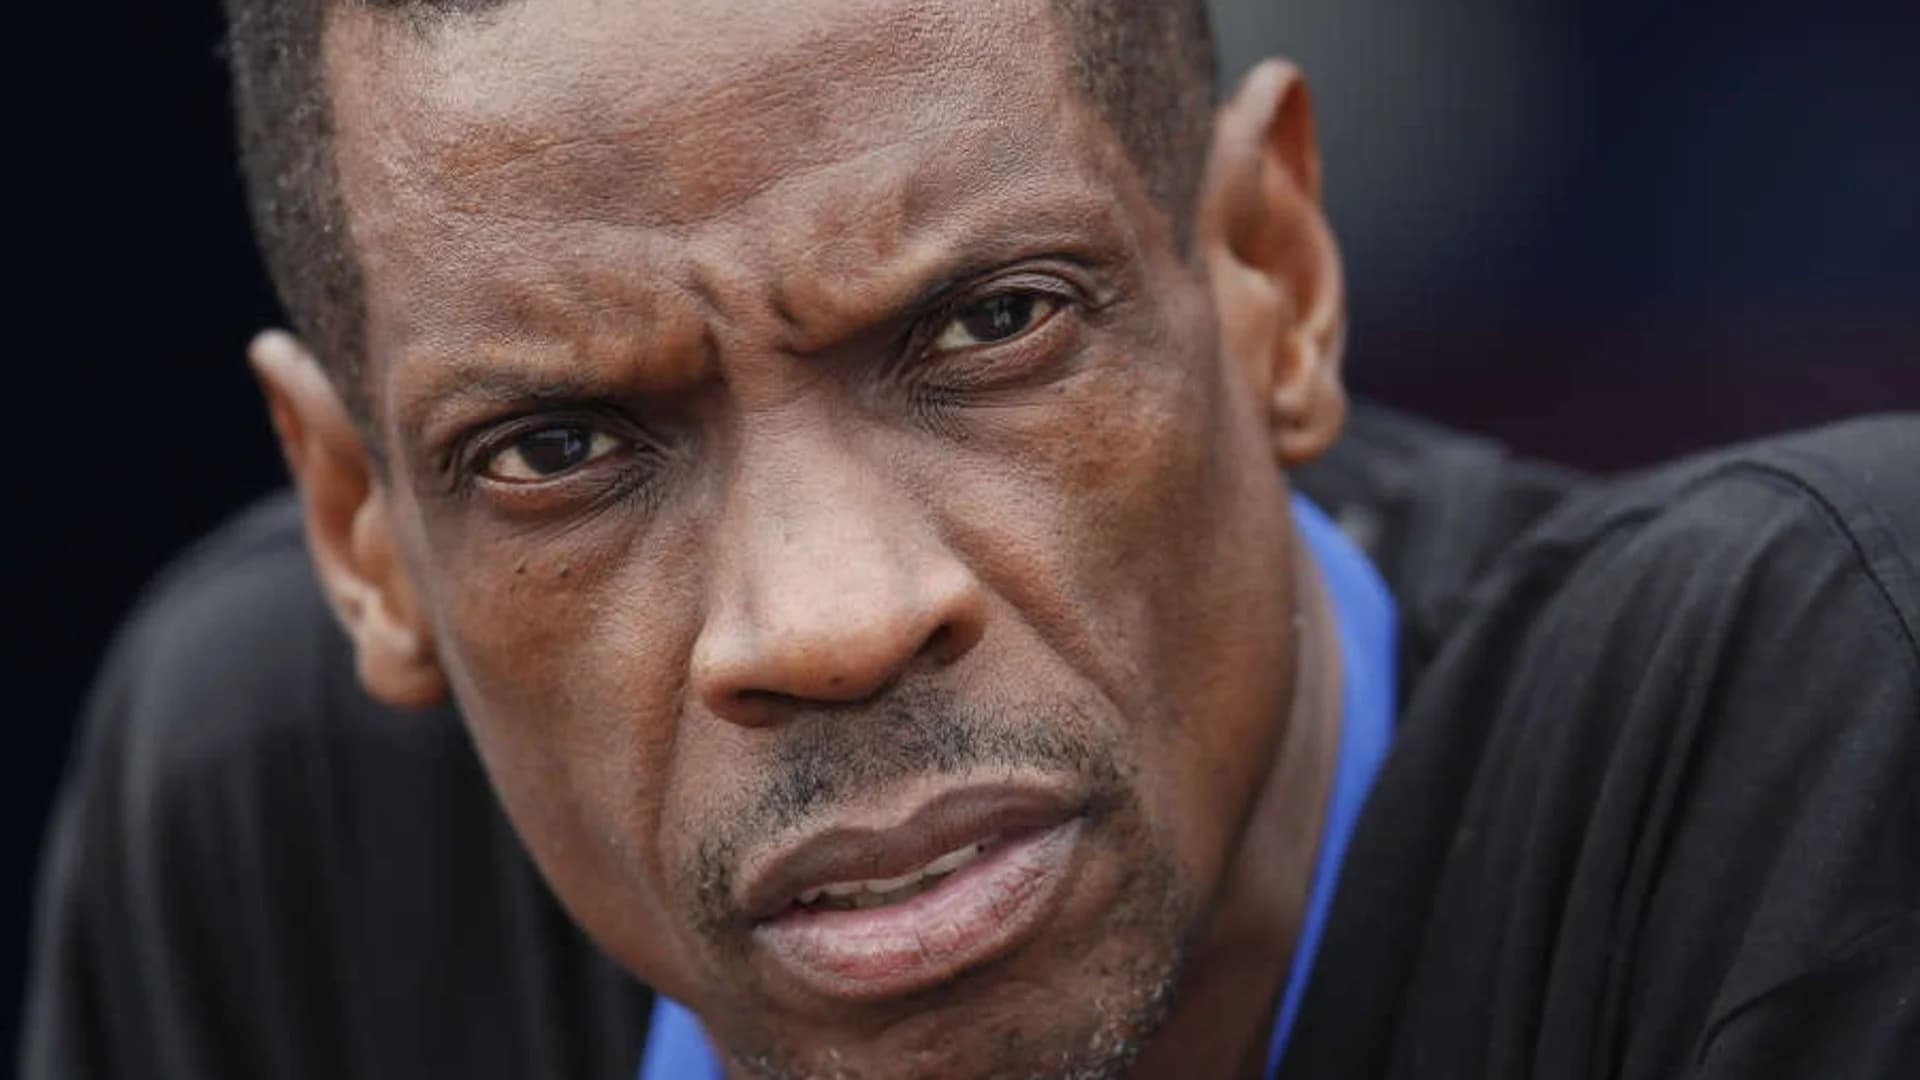 Former Mets, Yankees player Dwight Gooden faces drug, DUI charges